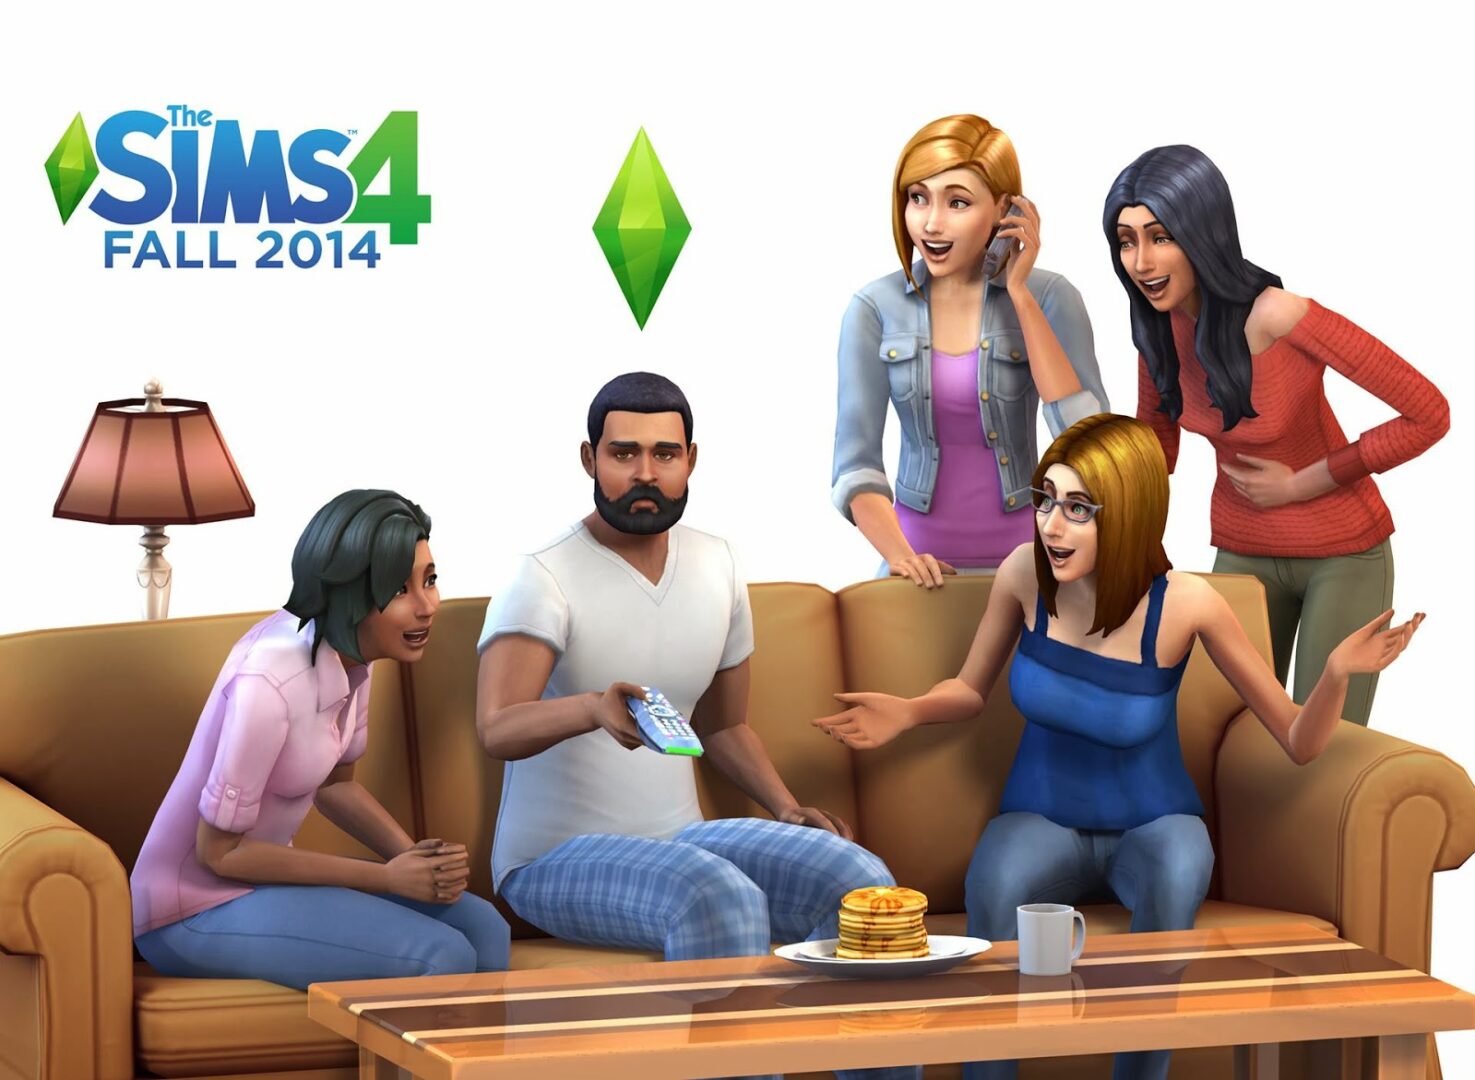 New Sims 4 Trailer Released Shows-off the Emotions of a Sim